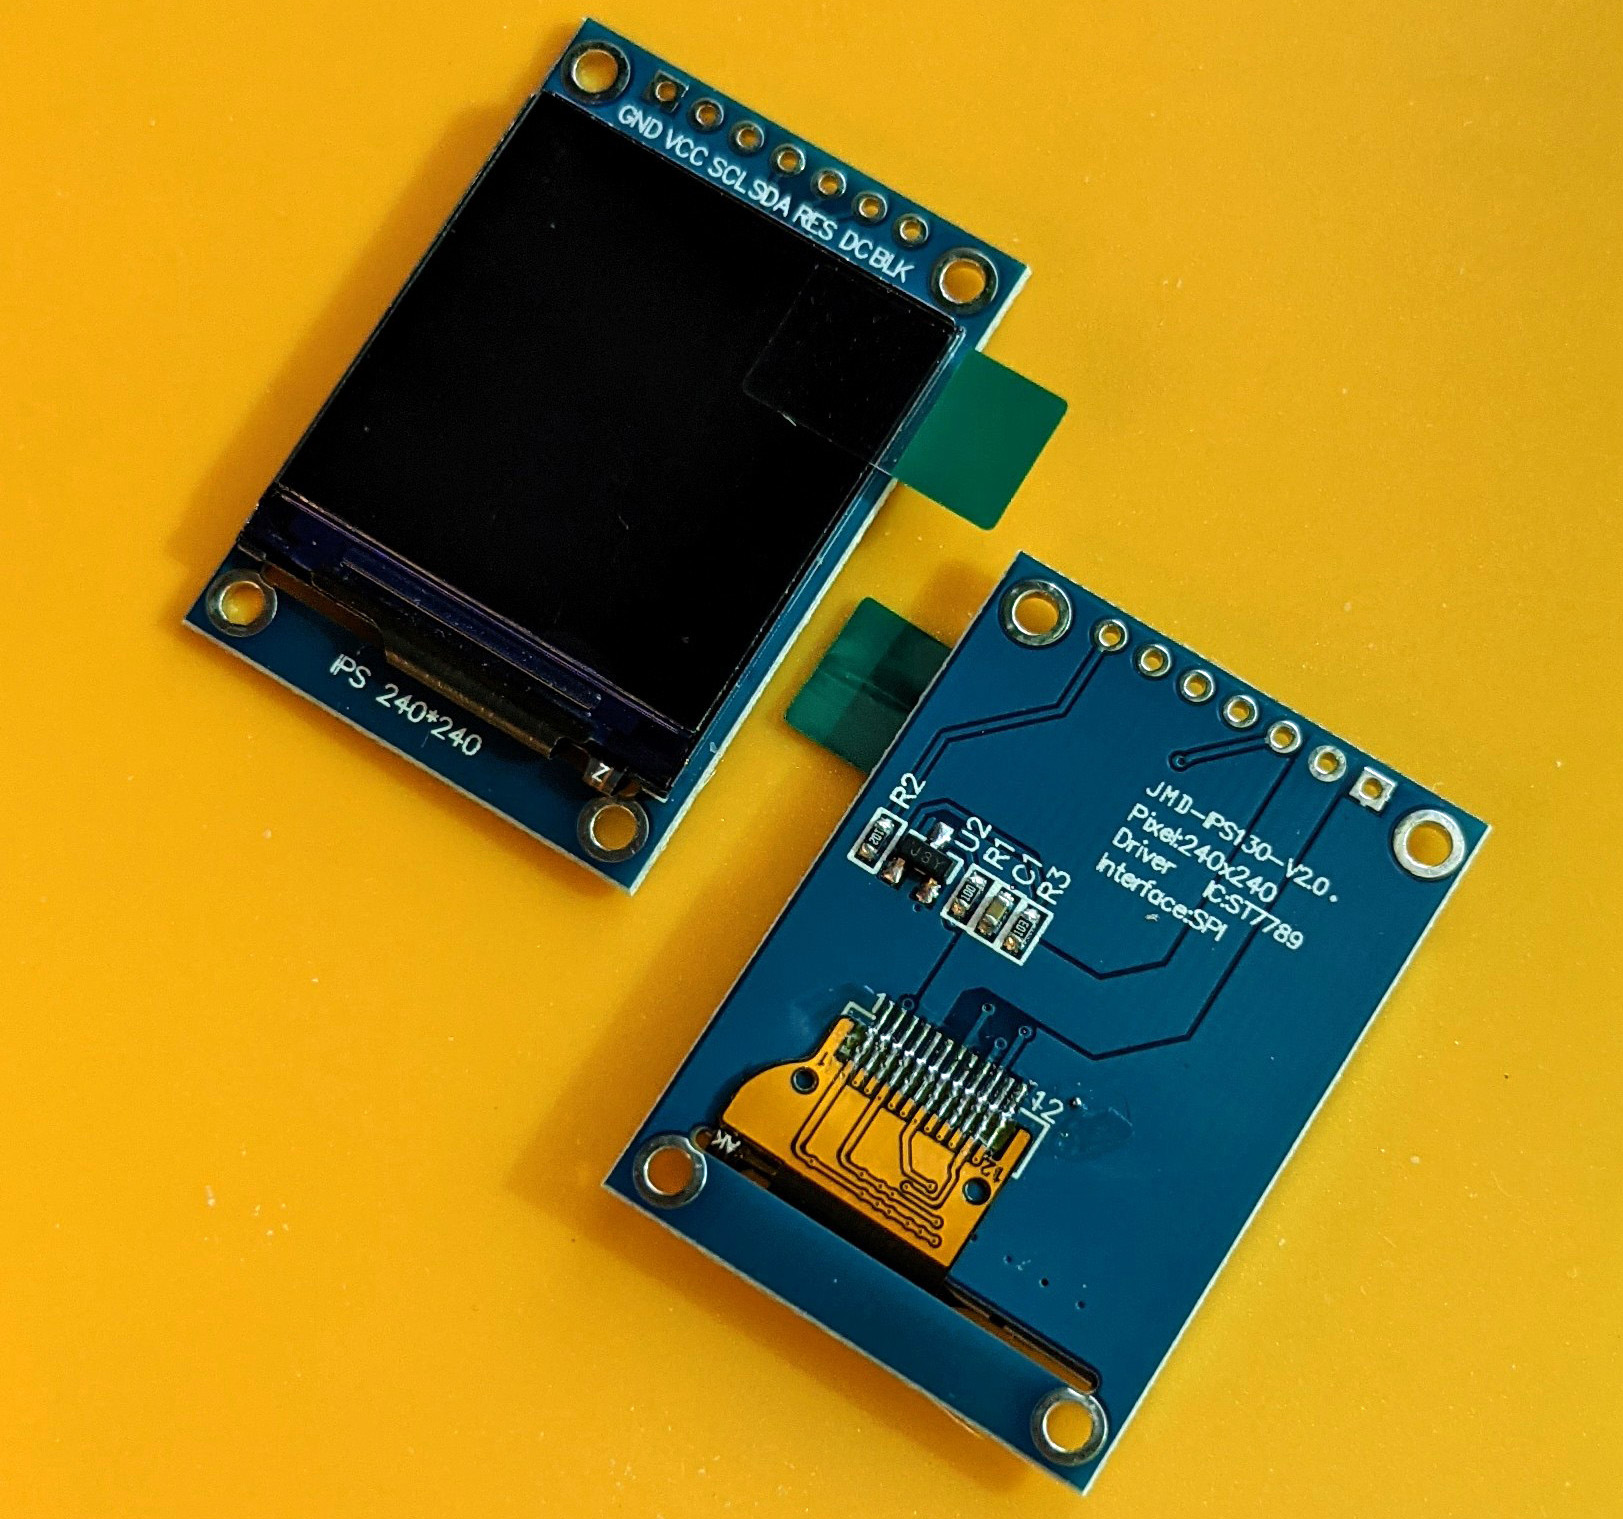 ST7789 Display Controller with SPI Interface